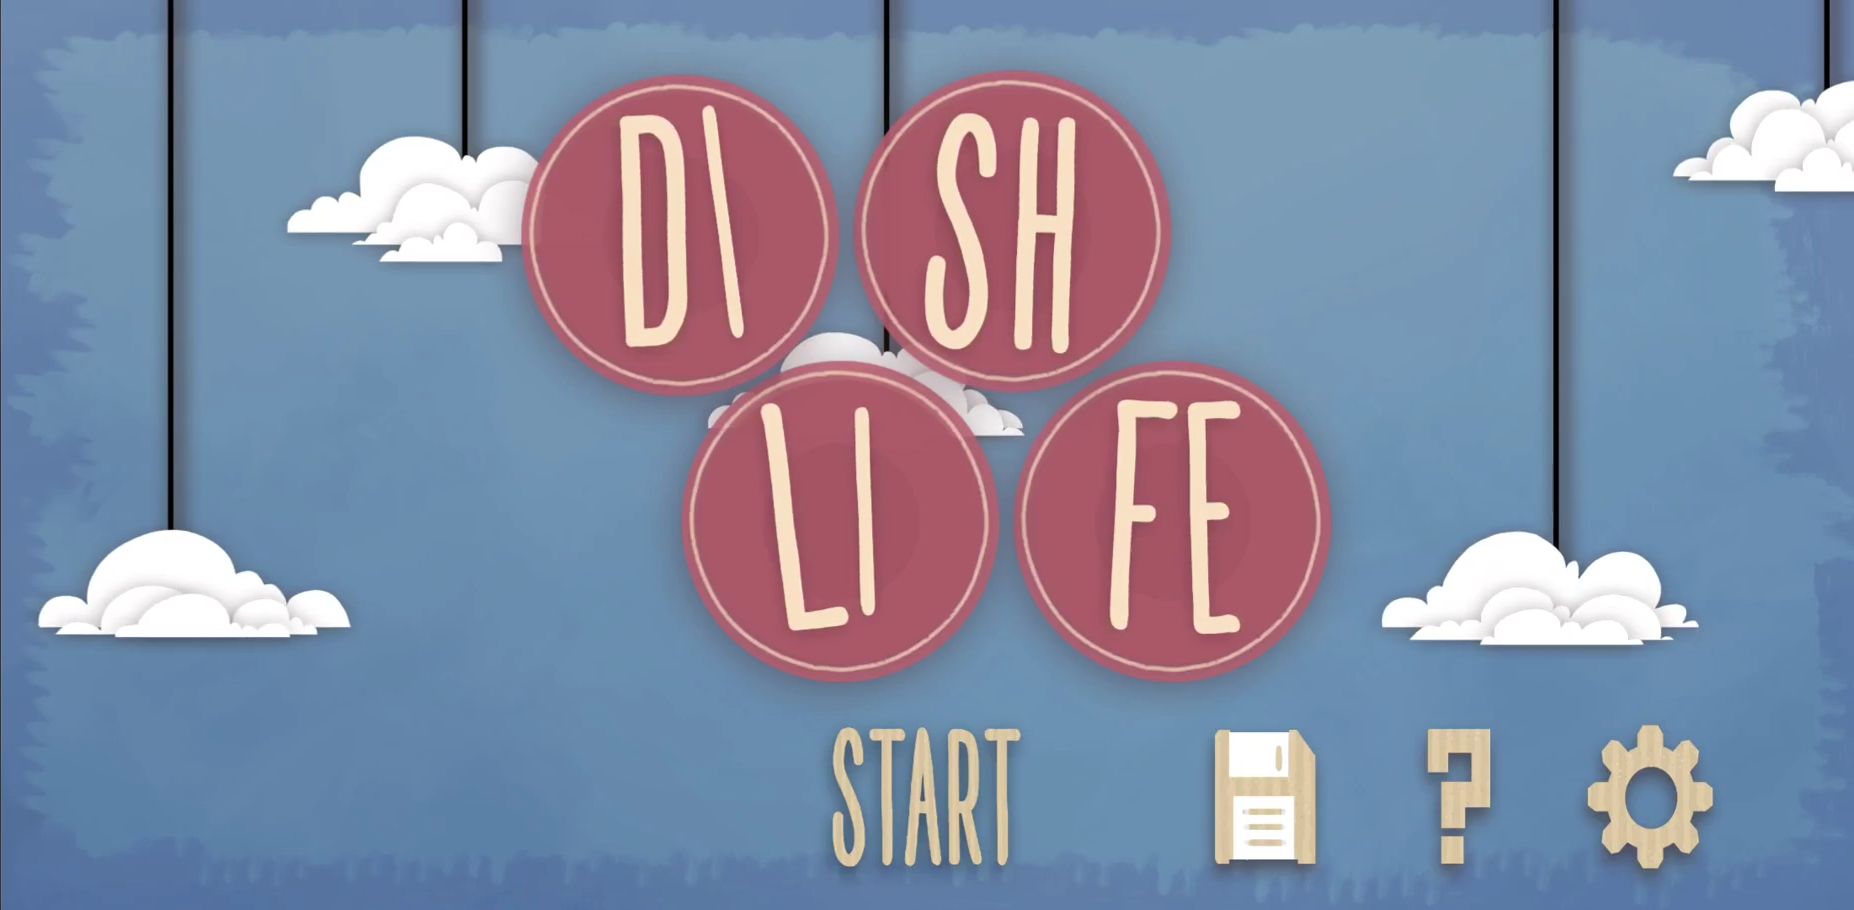 Dish Life: The Game for Android